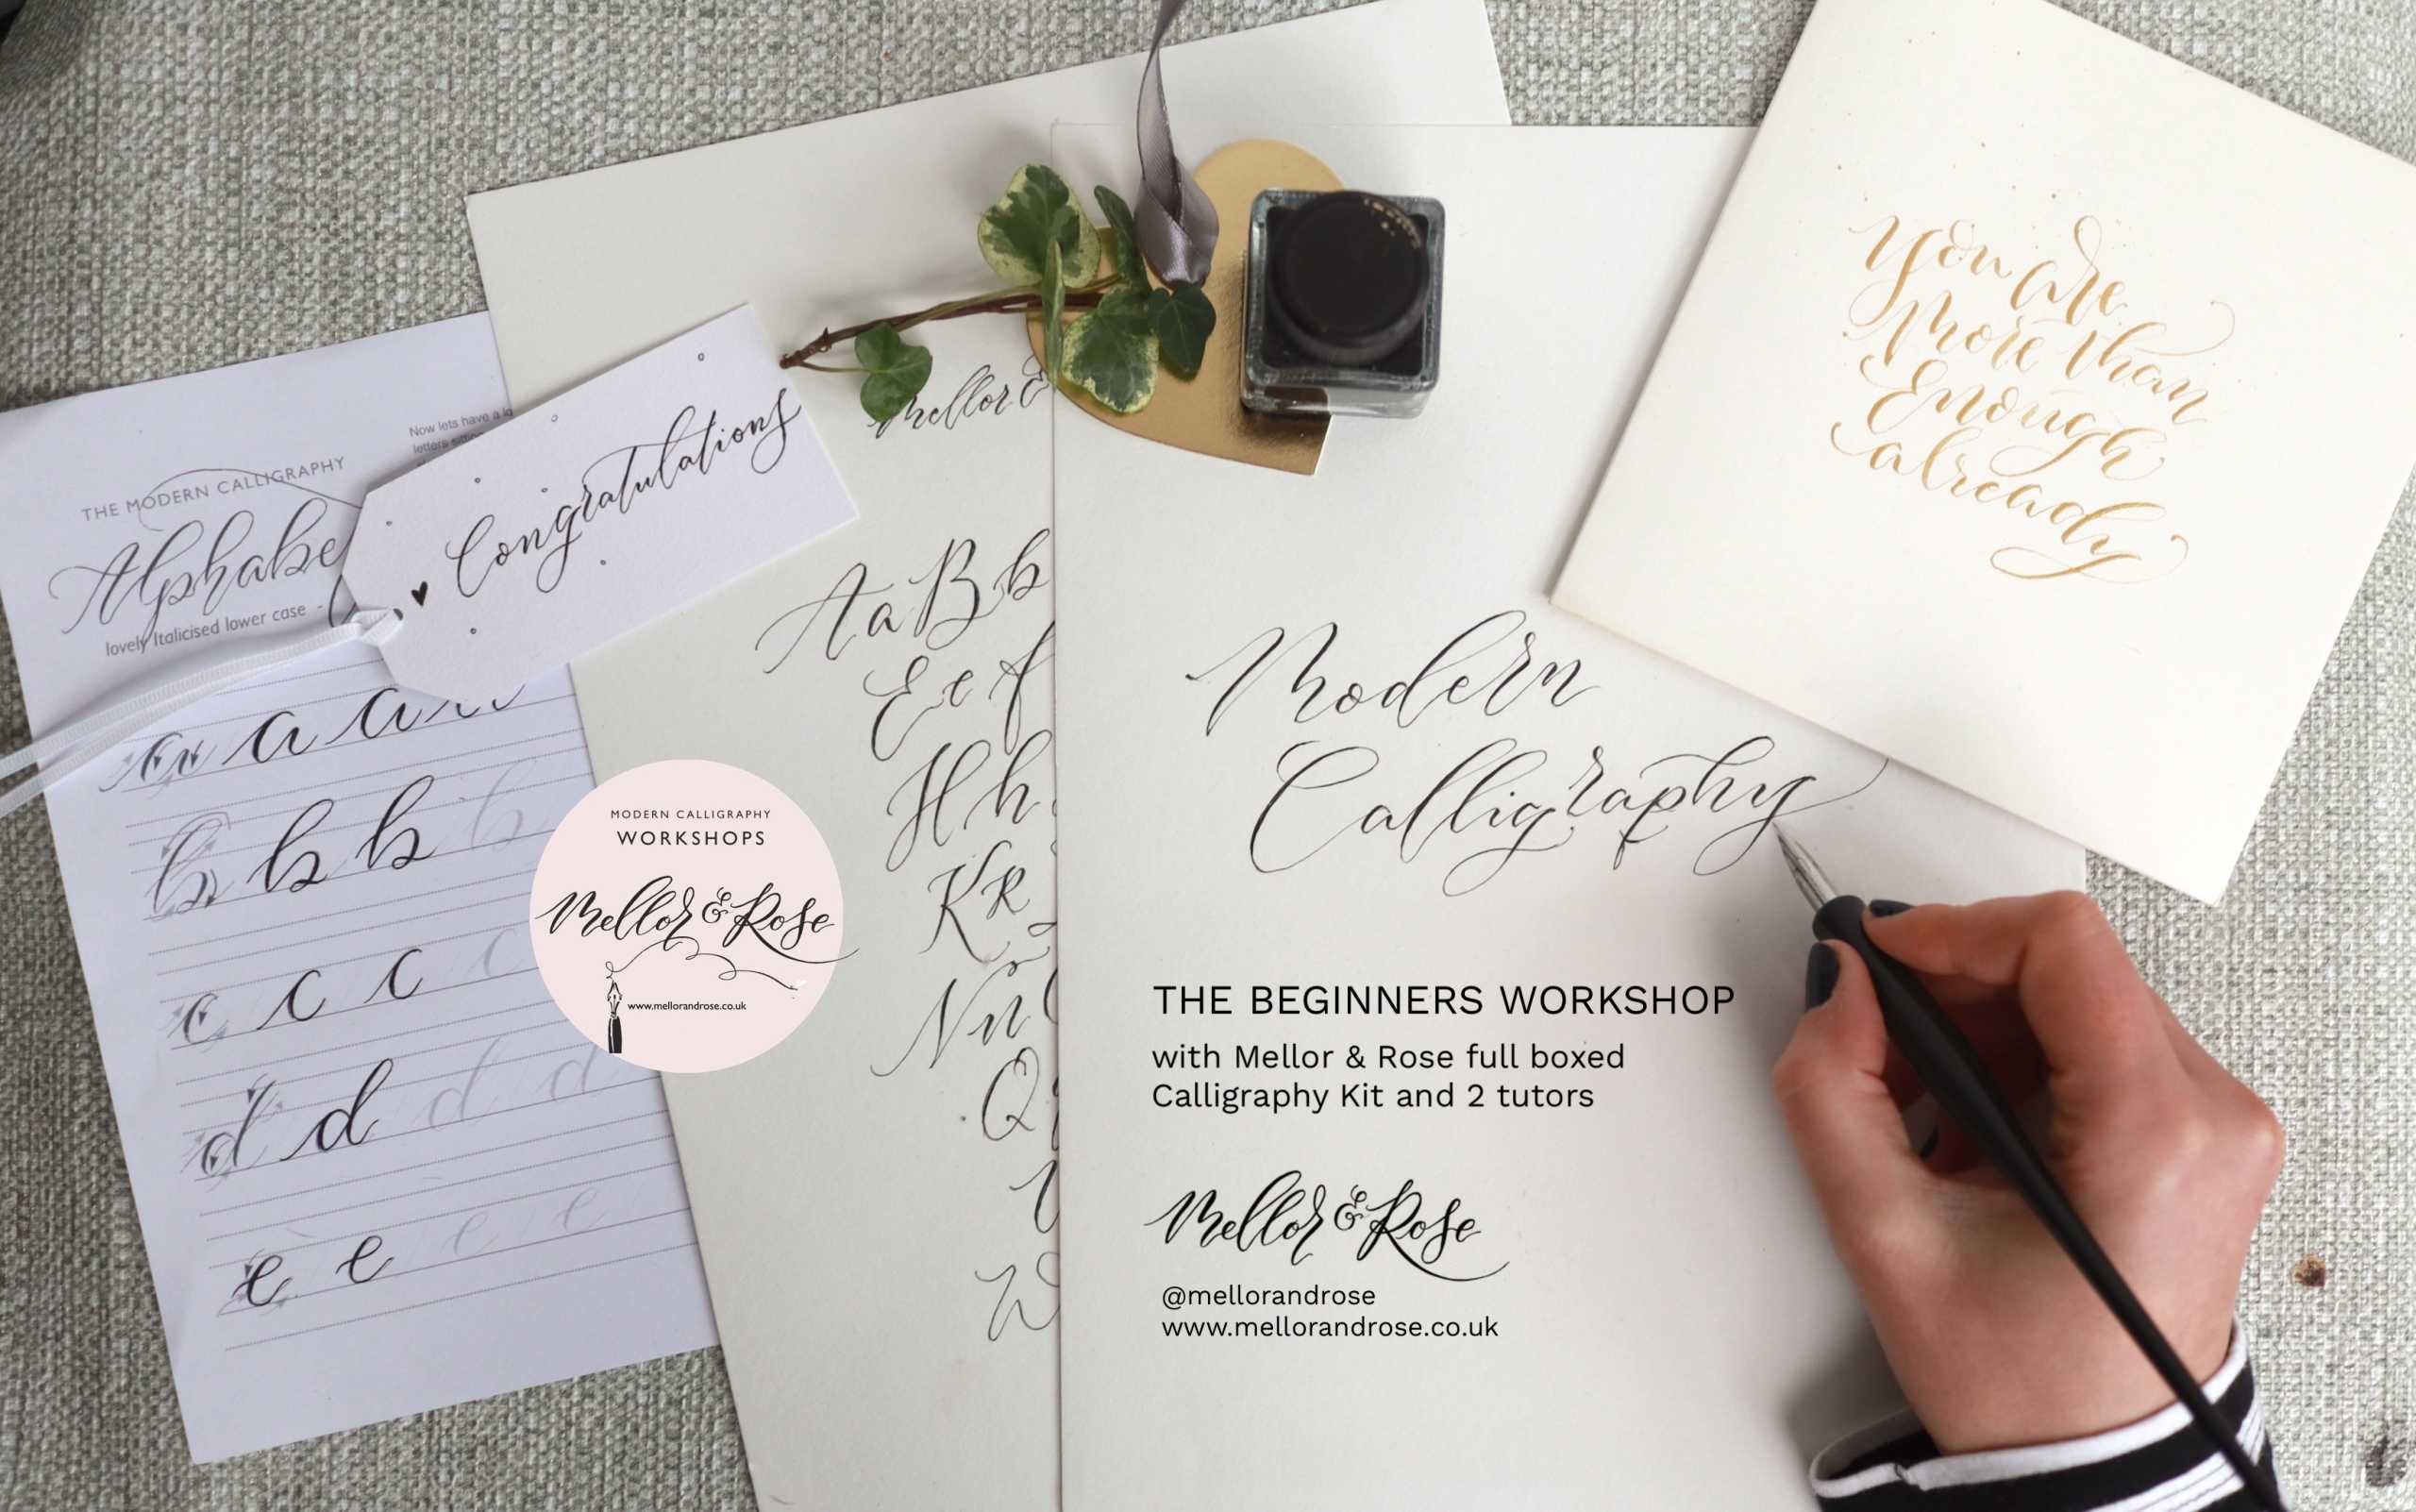 Mellor & Rose Modern Calligraphy Workshop at Eden Tearoom and Galleries in Wigan, Lancashire